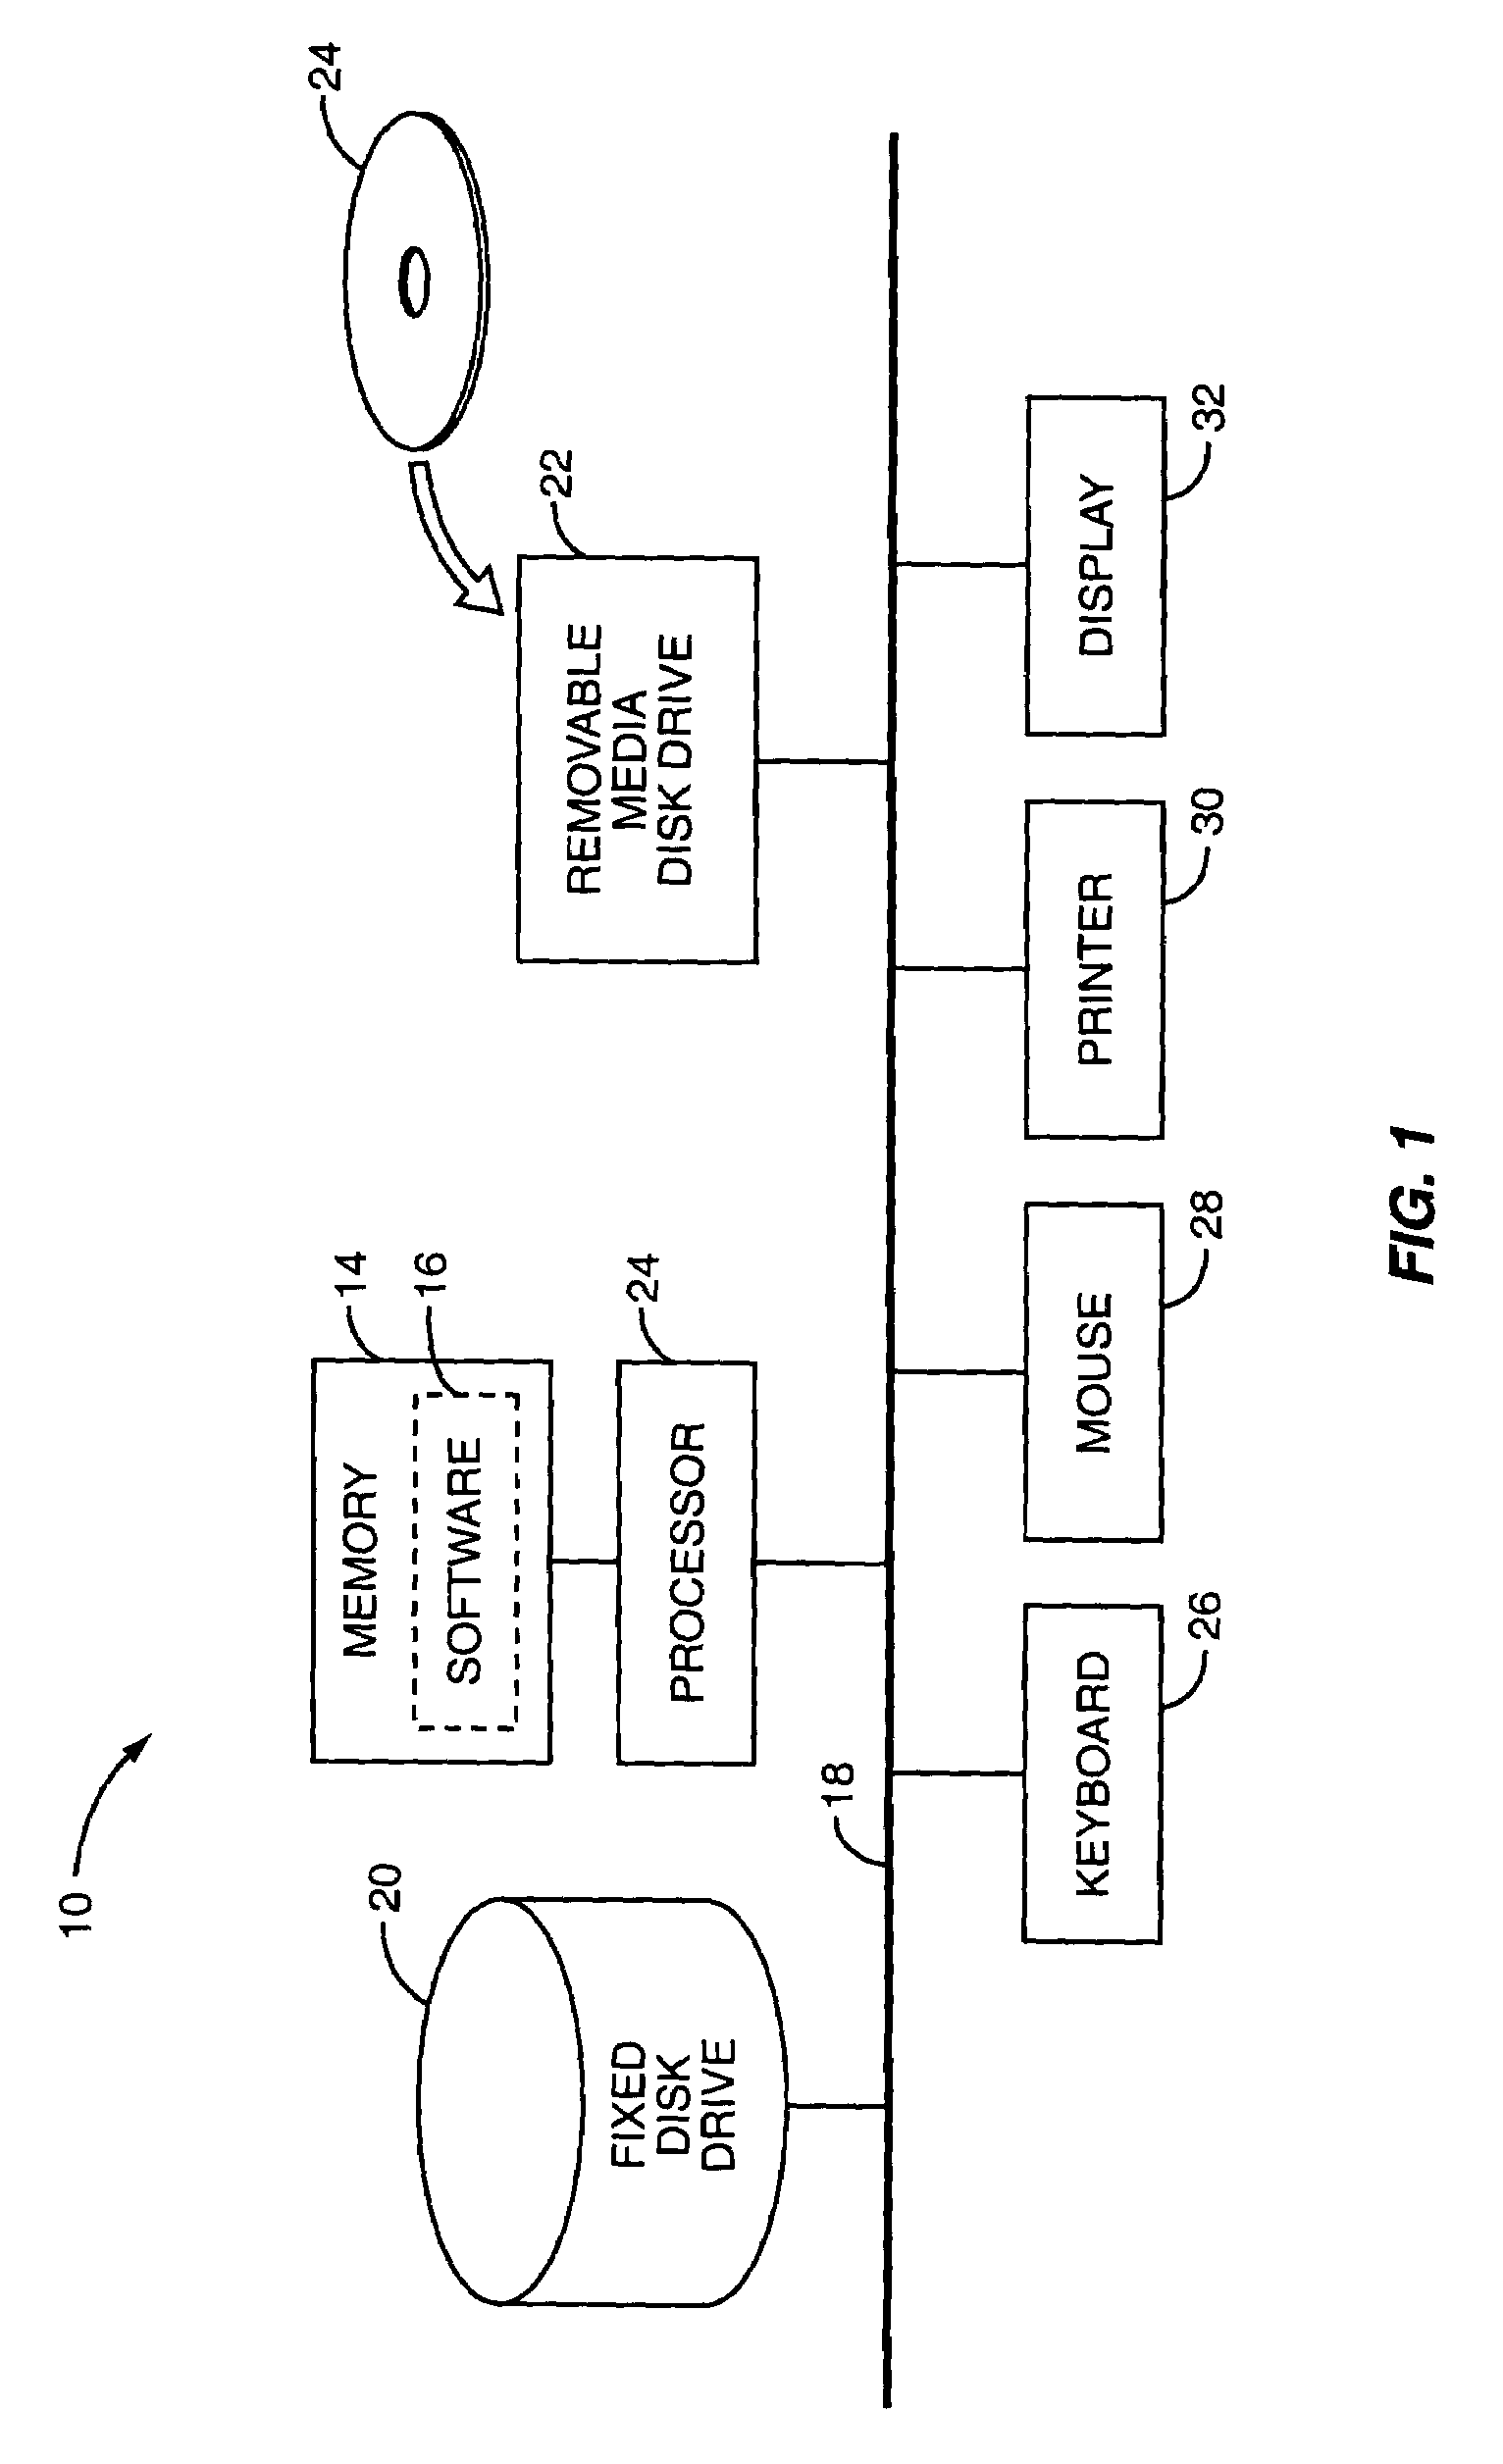 System and method to display table data residing in columns outside the viewable area of a window